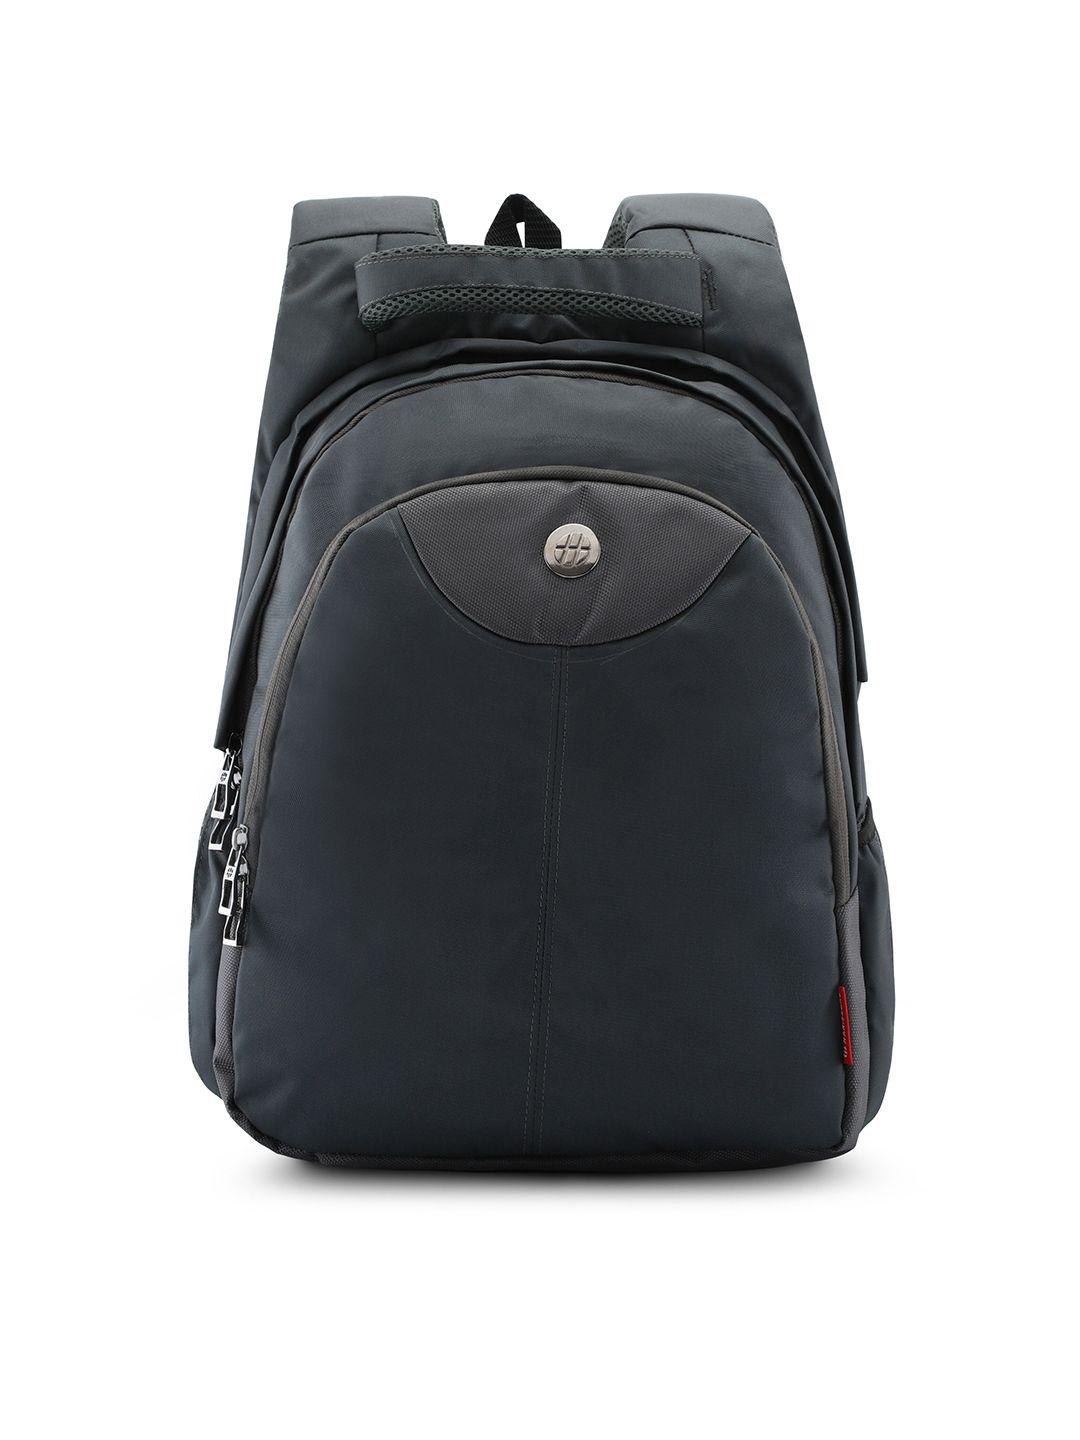 harissons grey 16 inch laptop backpack